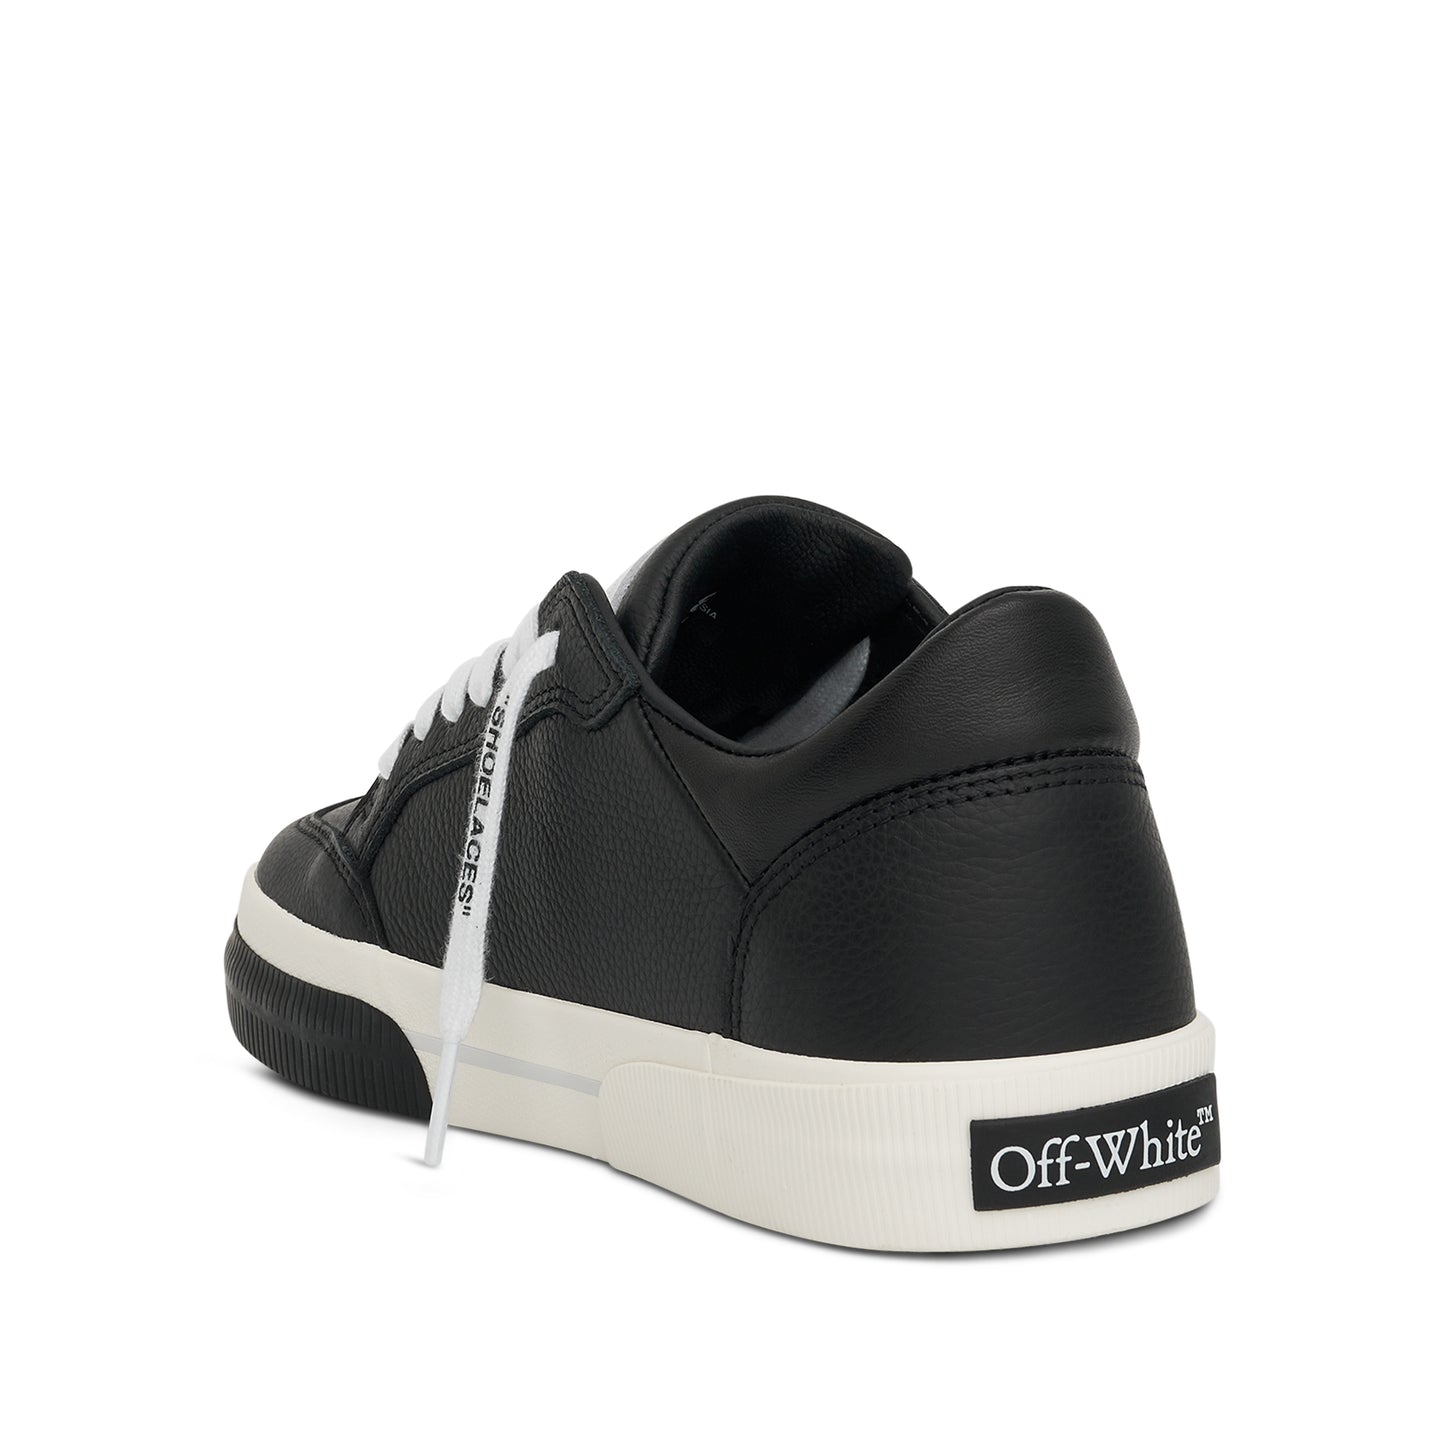 Out of Office Calf Leather Sneaker in Dark Grey/Black